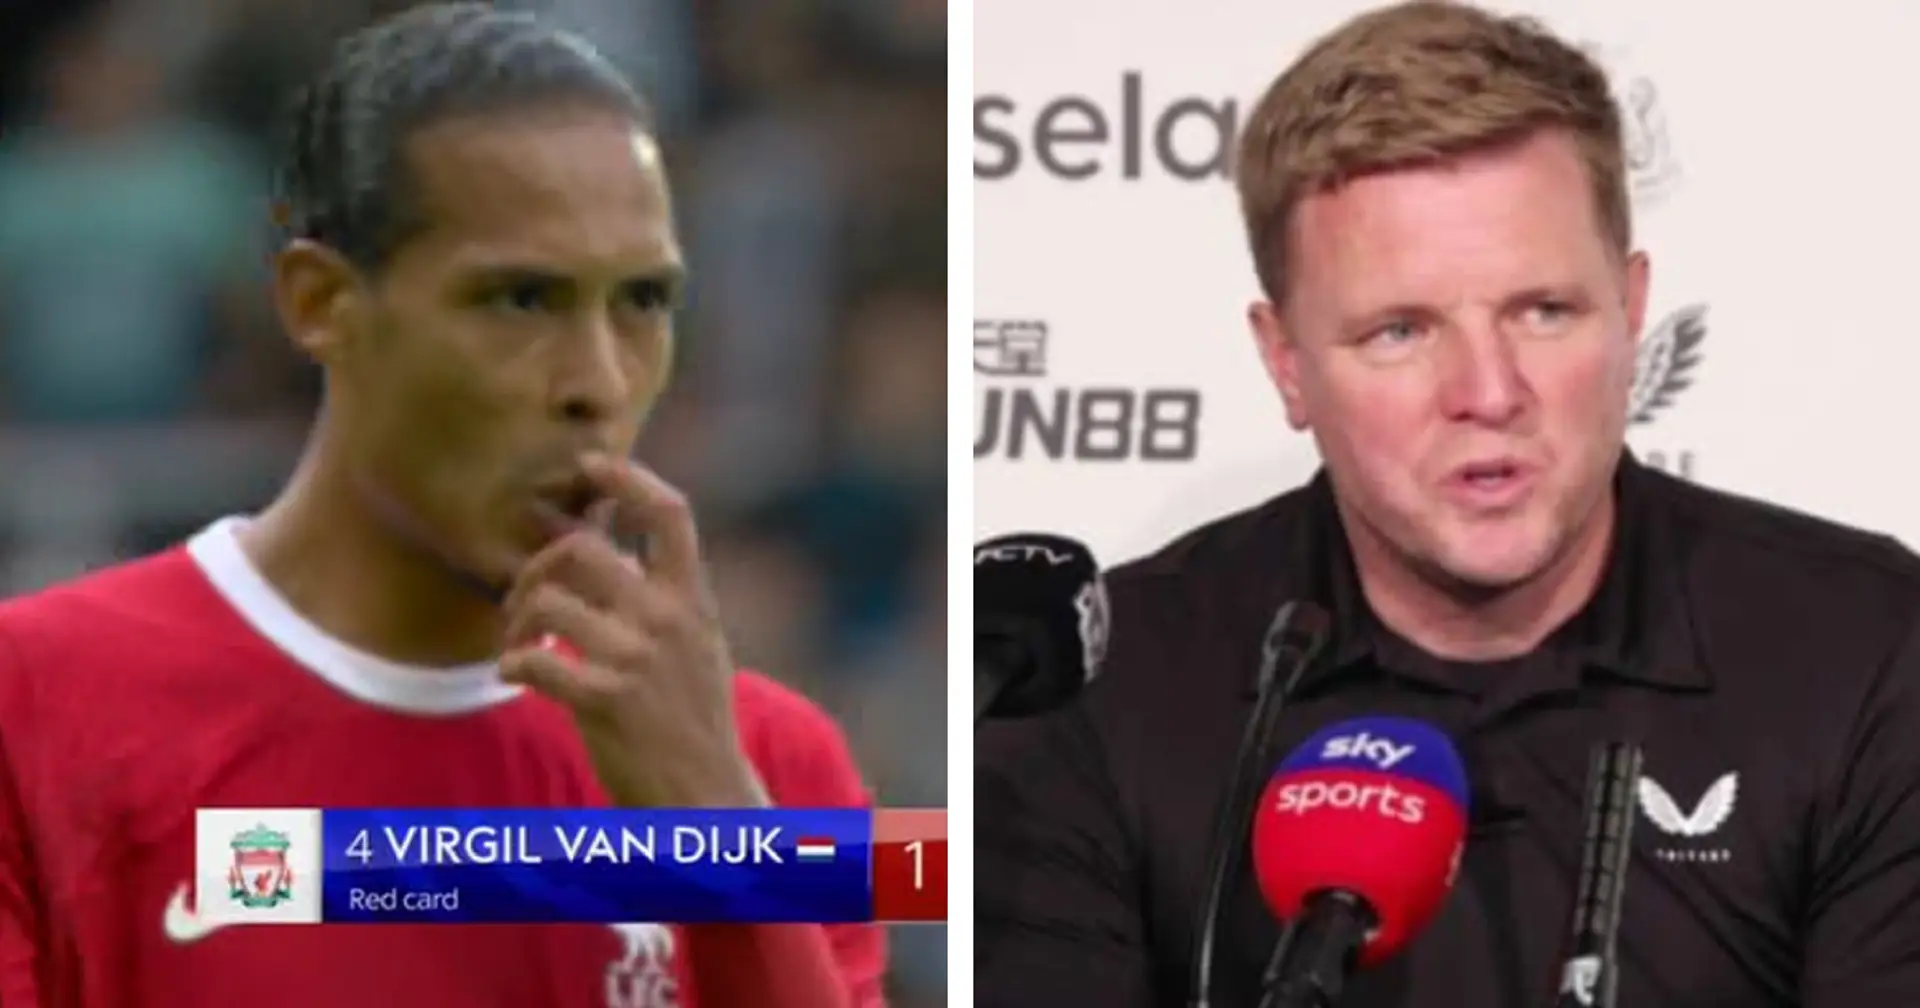 Eddie Howe disagrees with red card call in Liverpool defeat - it's nothing to do with Van Dijk